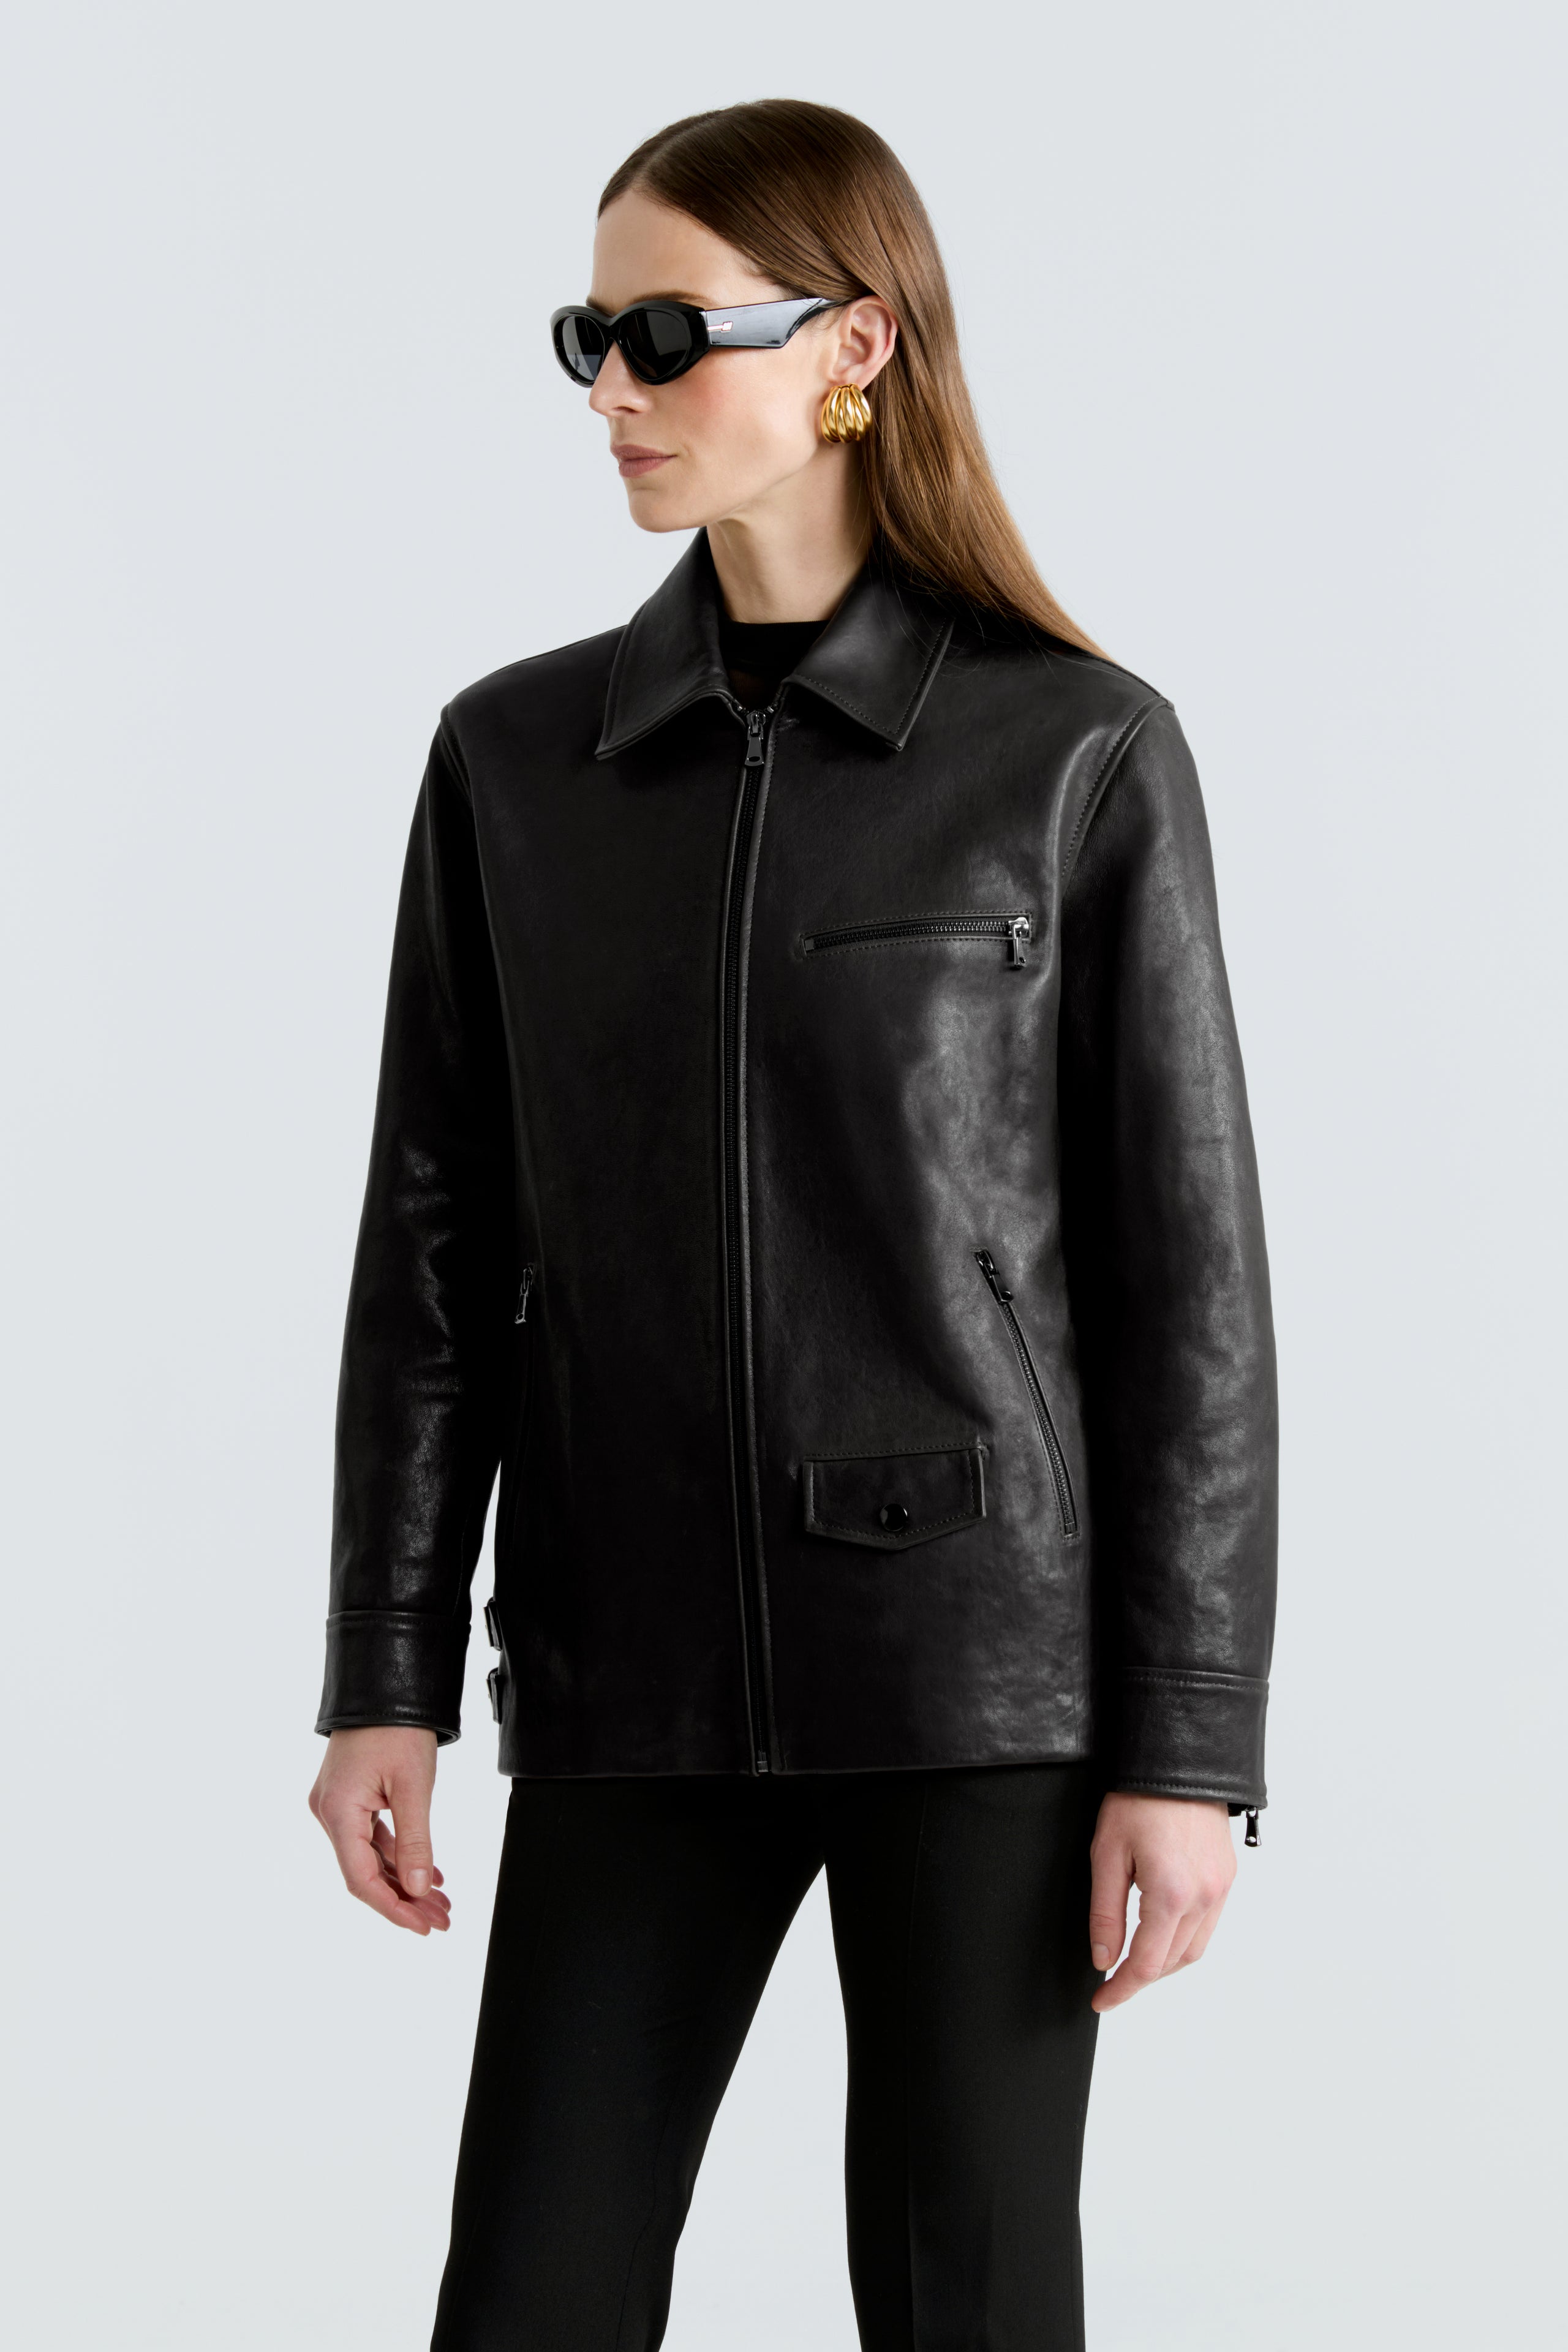 Model is wearing the Rayan Black Utilitarian Leather Jacket Close Up